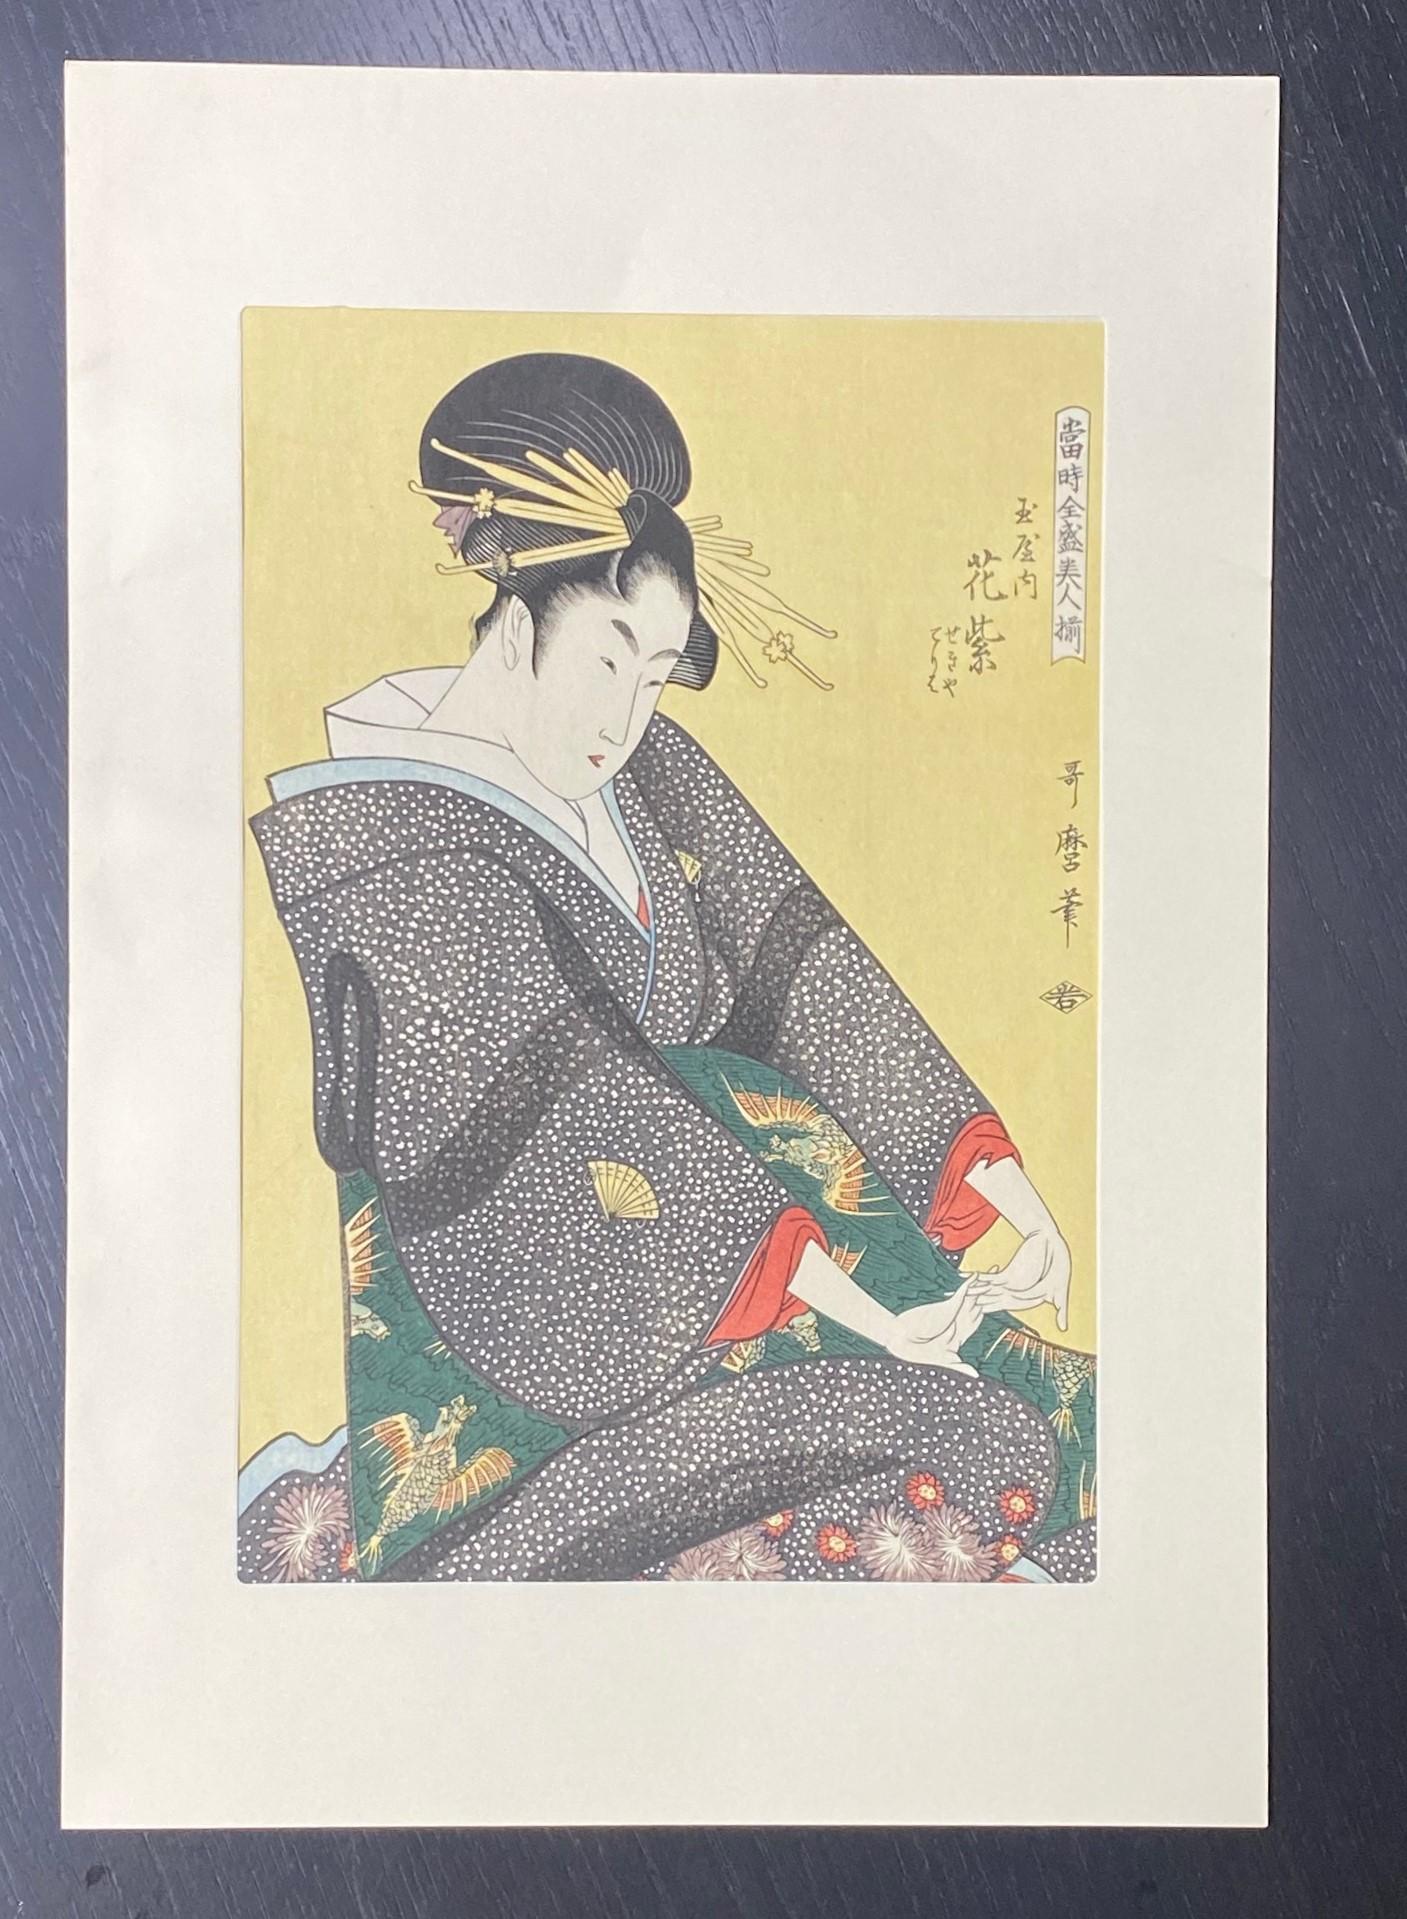 A wonderfully composed and subtly colored Japanese woodblock print featuring a beautifully decorated kimono-clad woman, likely a Geisha, with striking yellow hairpins (matching the background) in her hair.   

This is likely a later printing of an